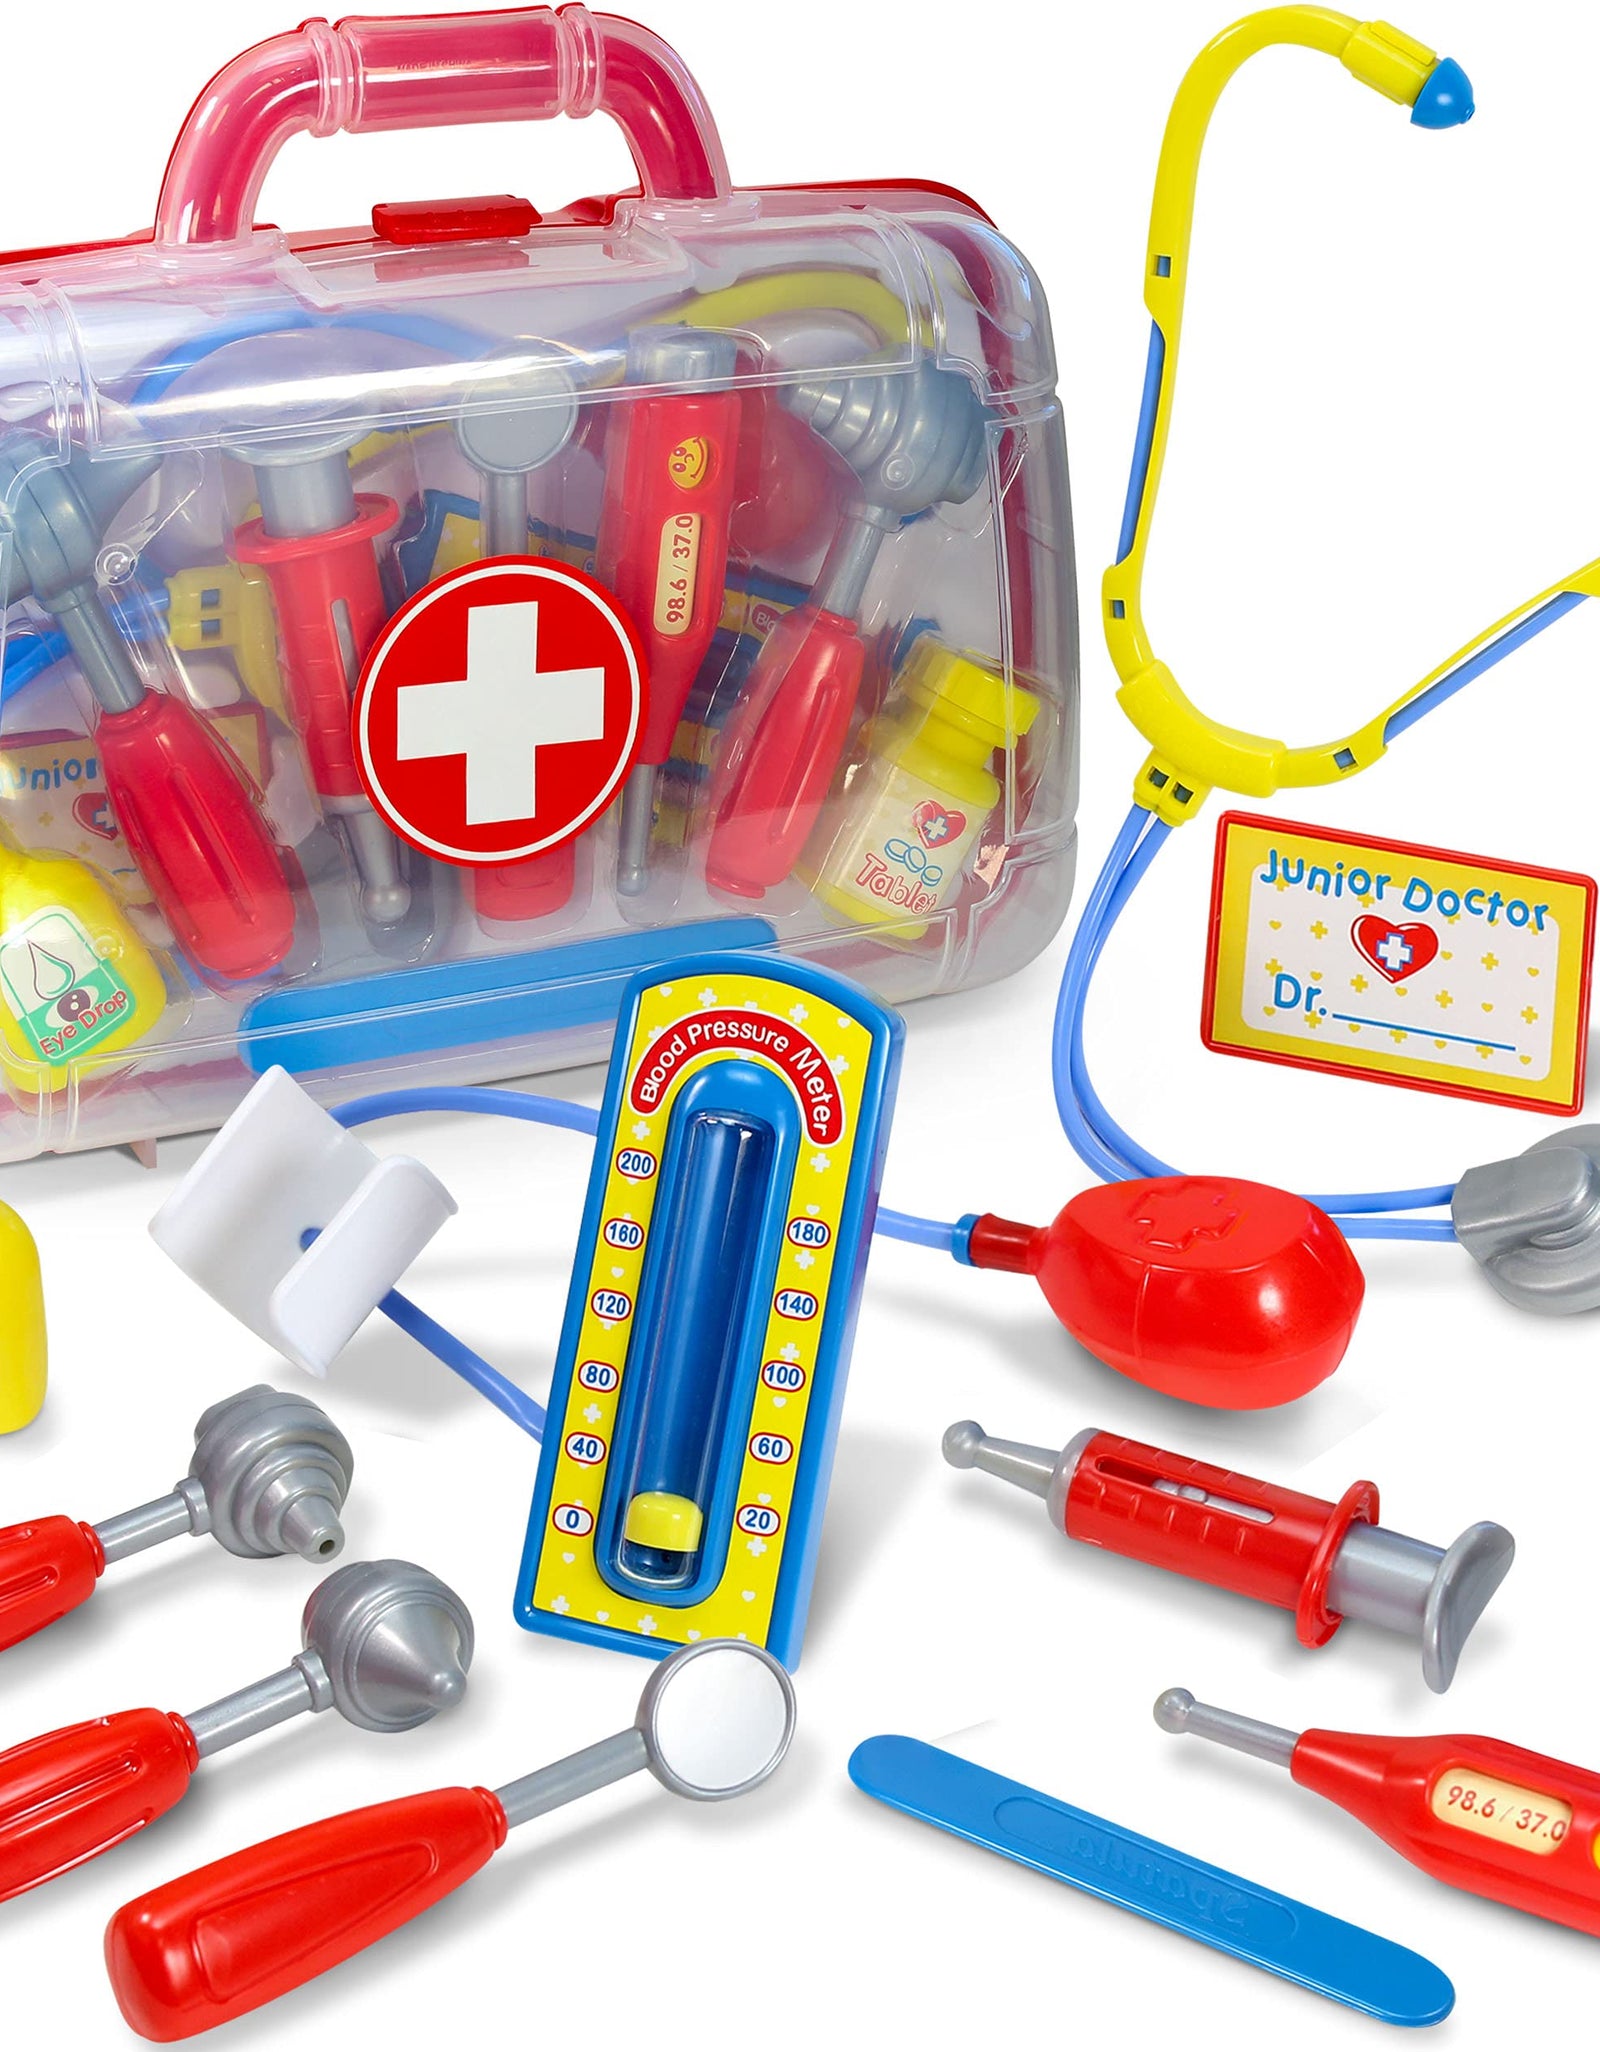 Kidzlane Doctor Kit for Kids | Kids Doctor Playset | Toddler Toy Doctor Kit | Play Doctor Set for Kids with Case | Pretend Medical Dr Kit with Kids Stethoscope Included